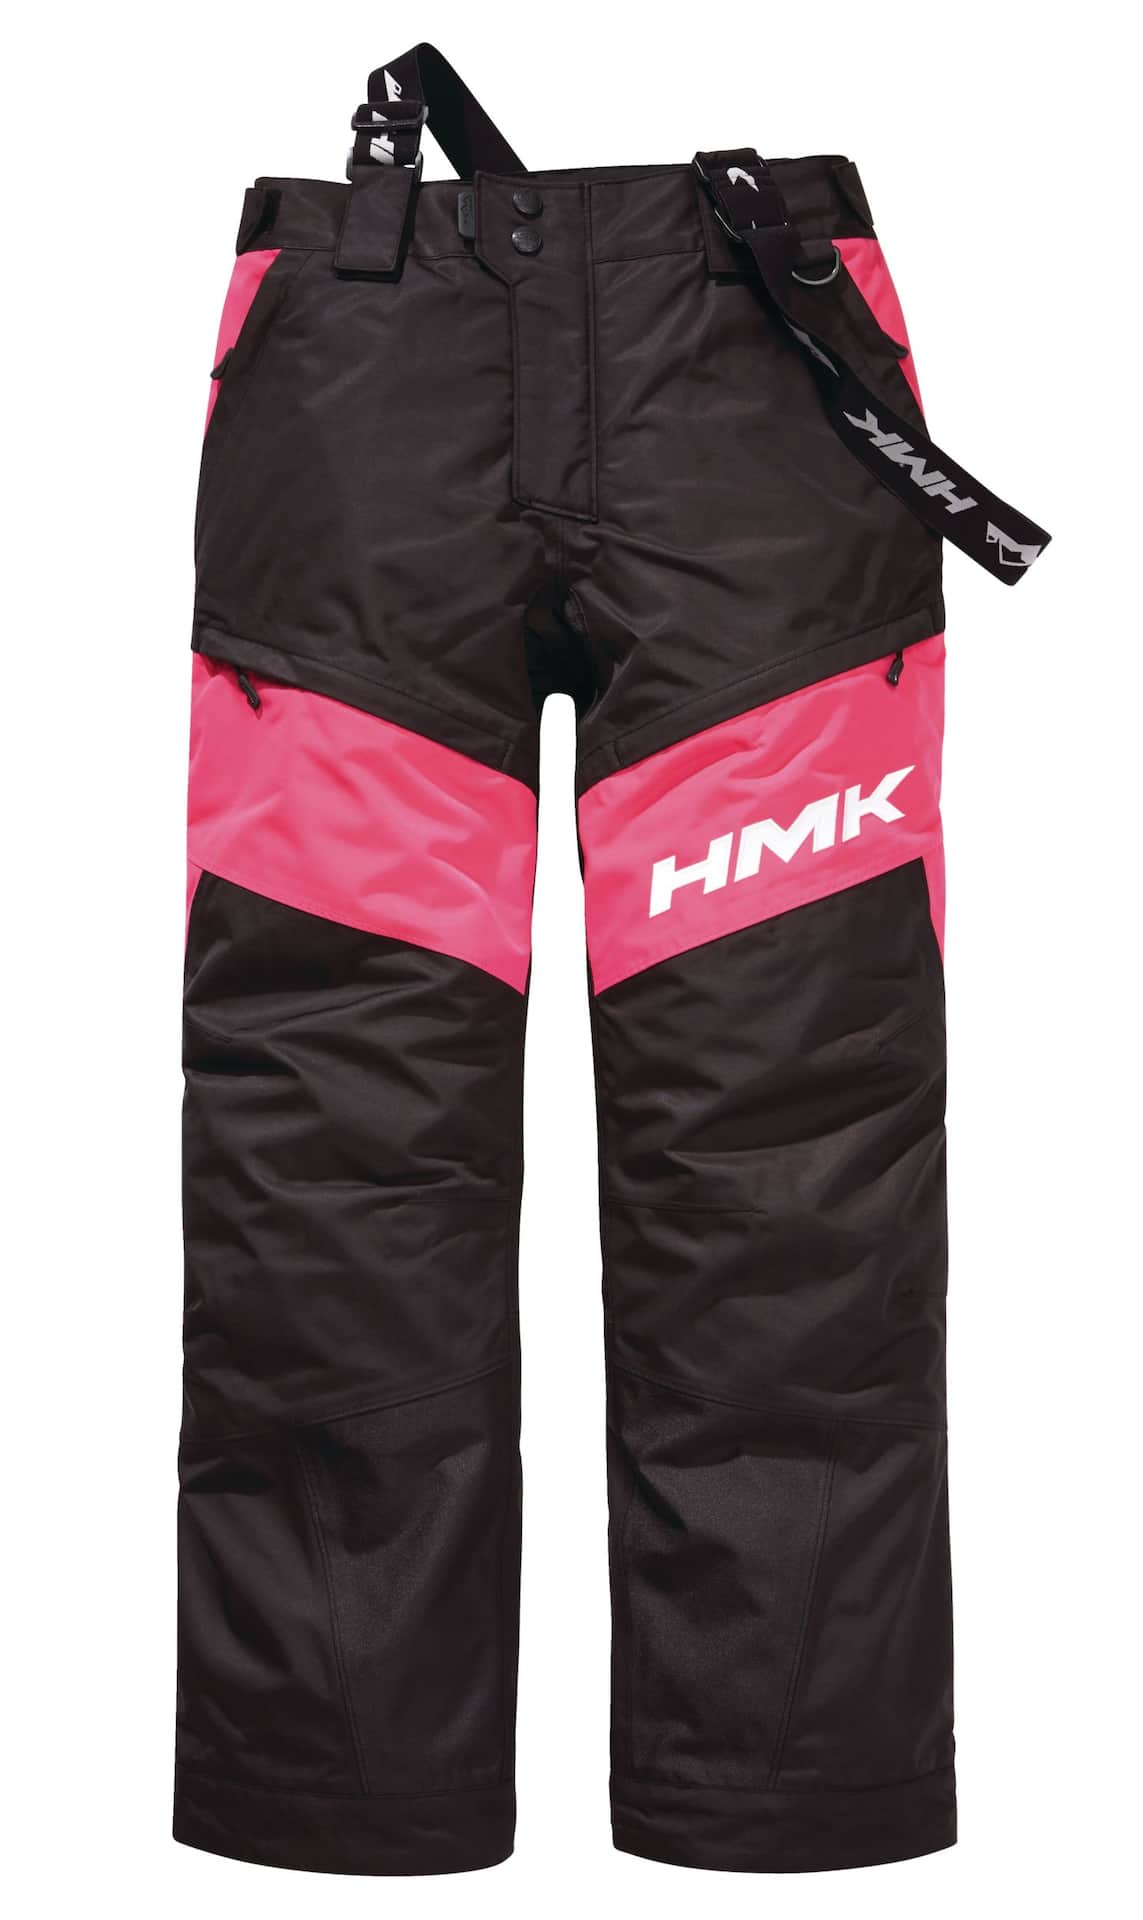 HMK Glacier Float Assist Insulated Women's Snow Pants, Pink, Assorted Sizes